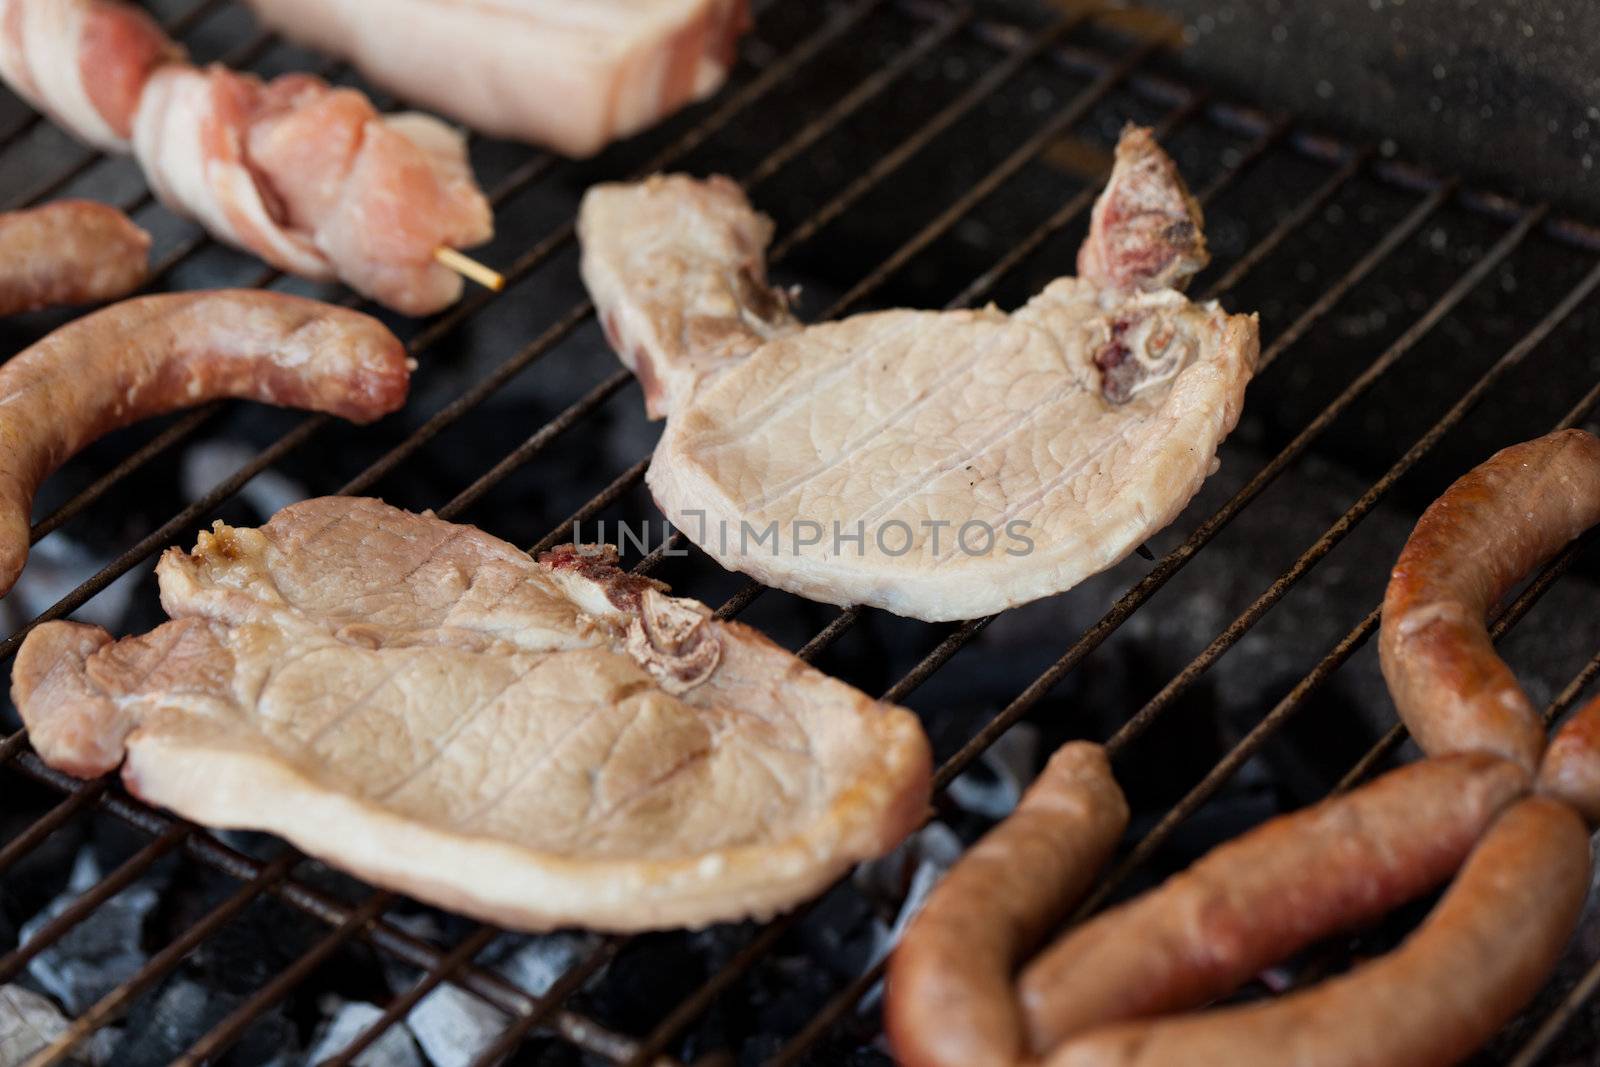 Several type of meats being cooked on a barbecue